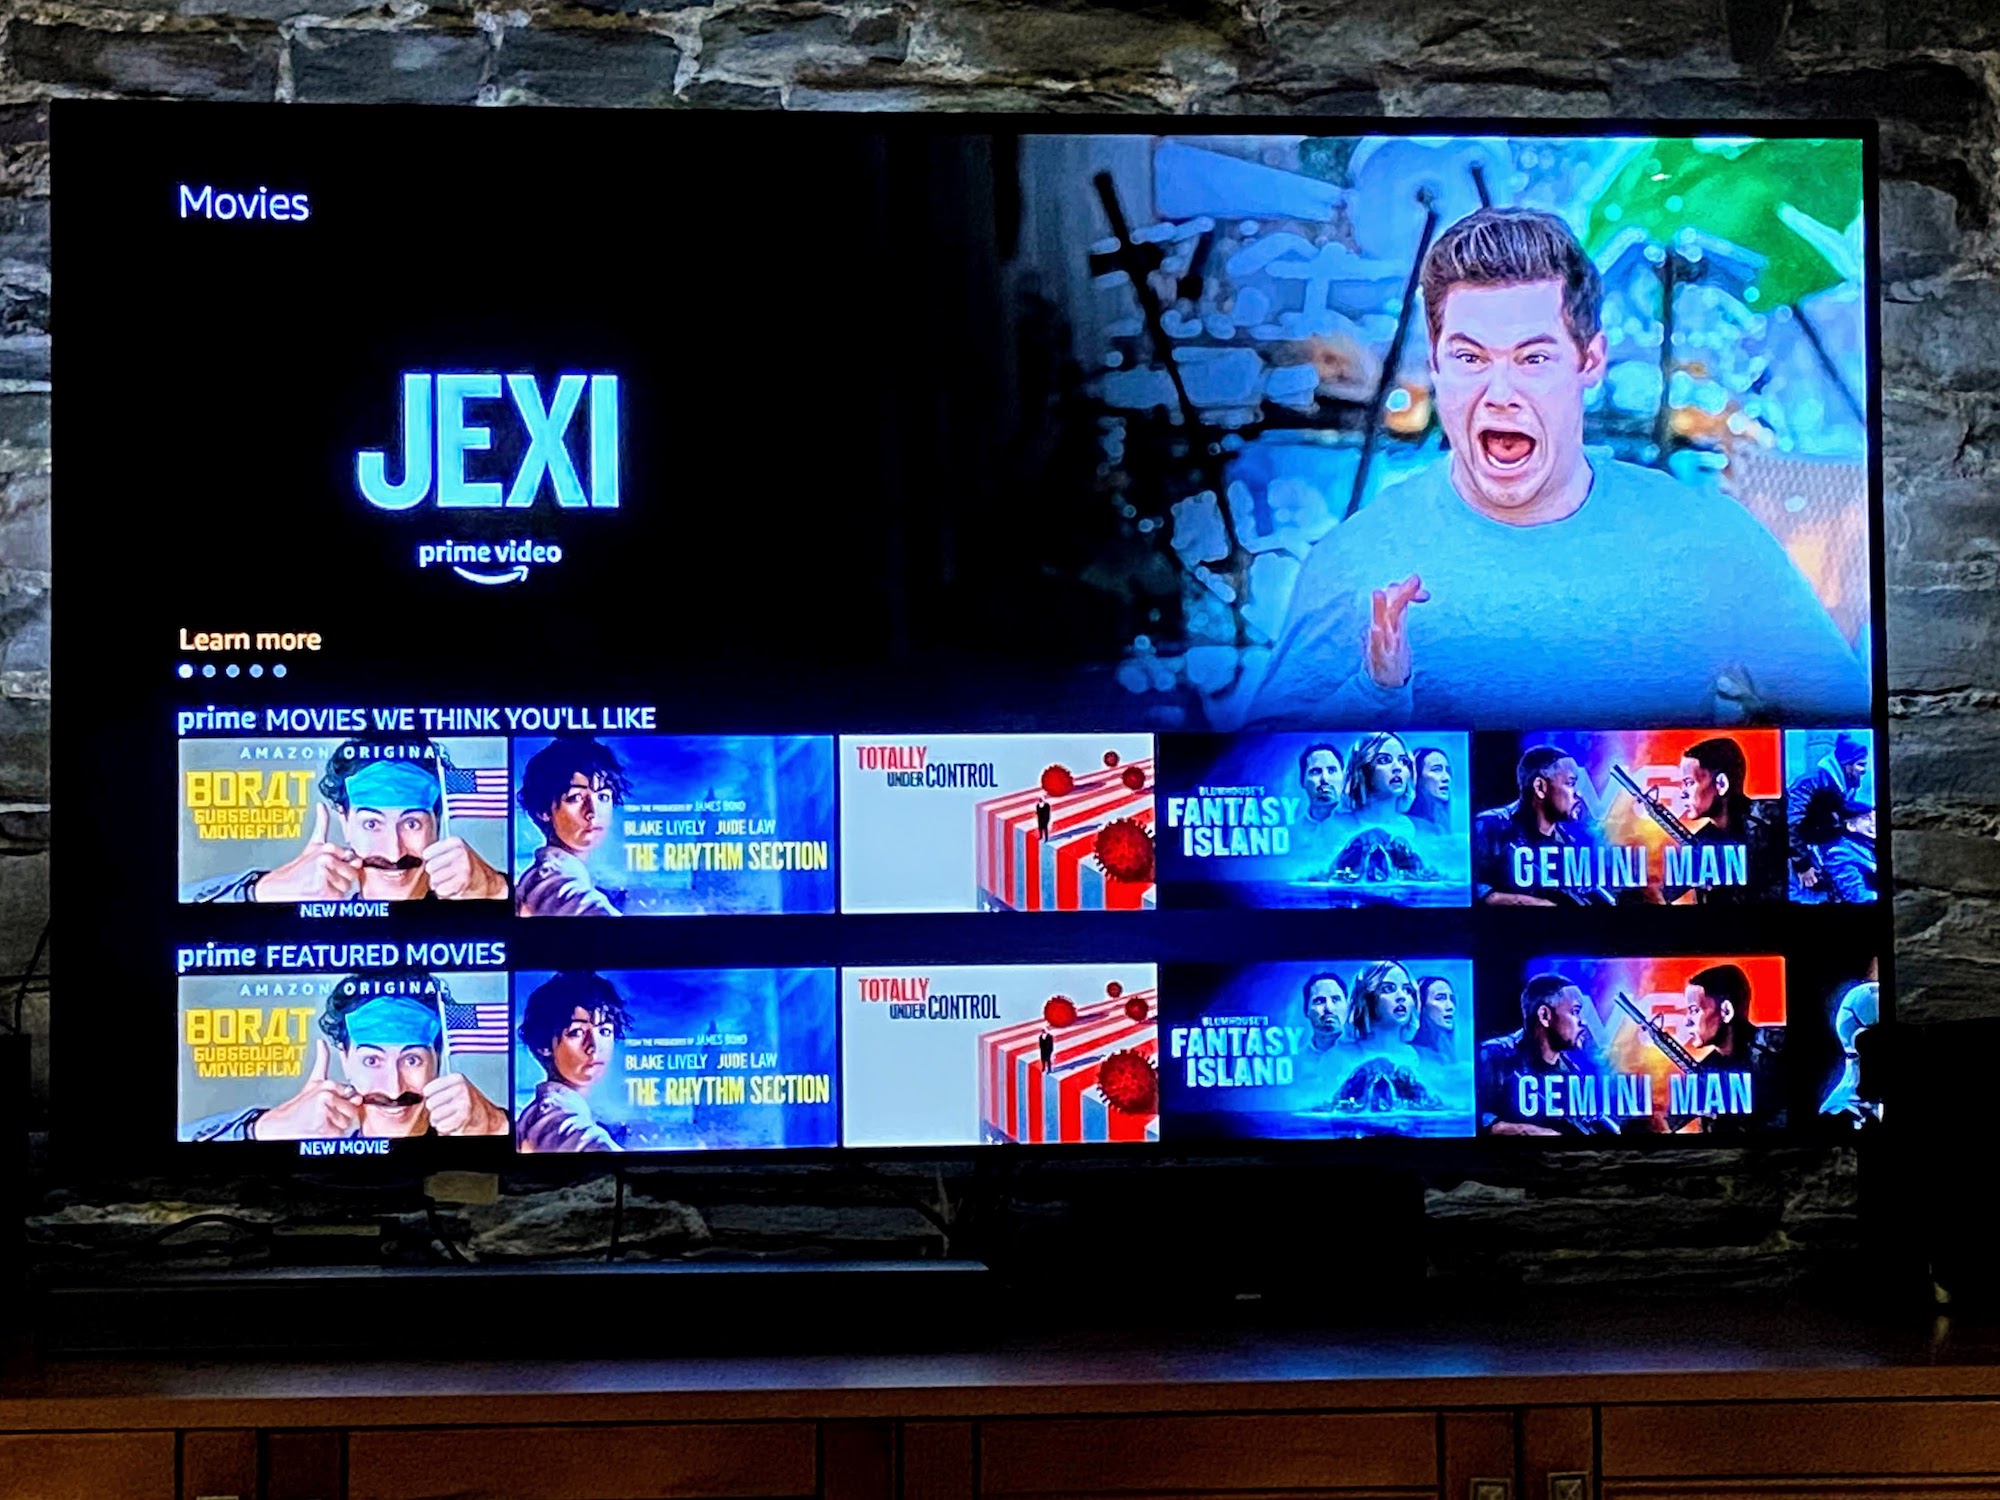 Fire TV Stick Lite Review: Capable Streamer, Cheap Price - CNET